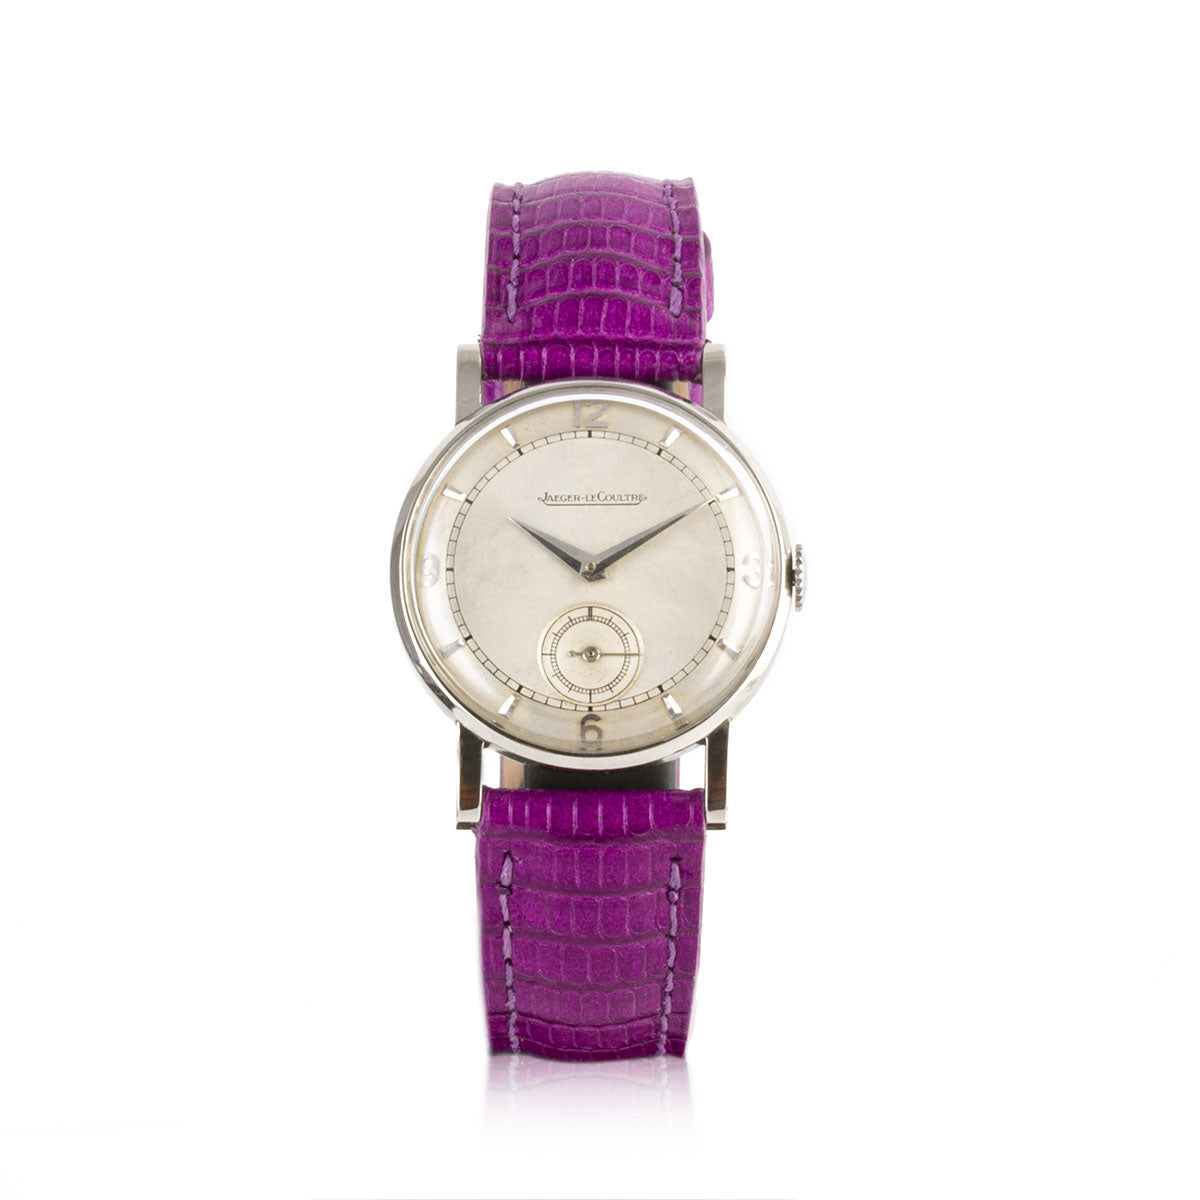 ​Second-hand watch - Jaeger Lecoultre - 1900€